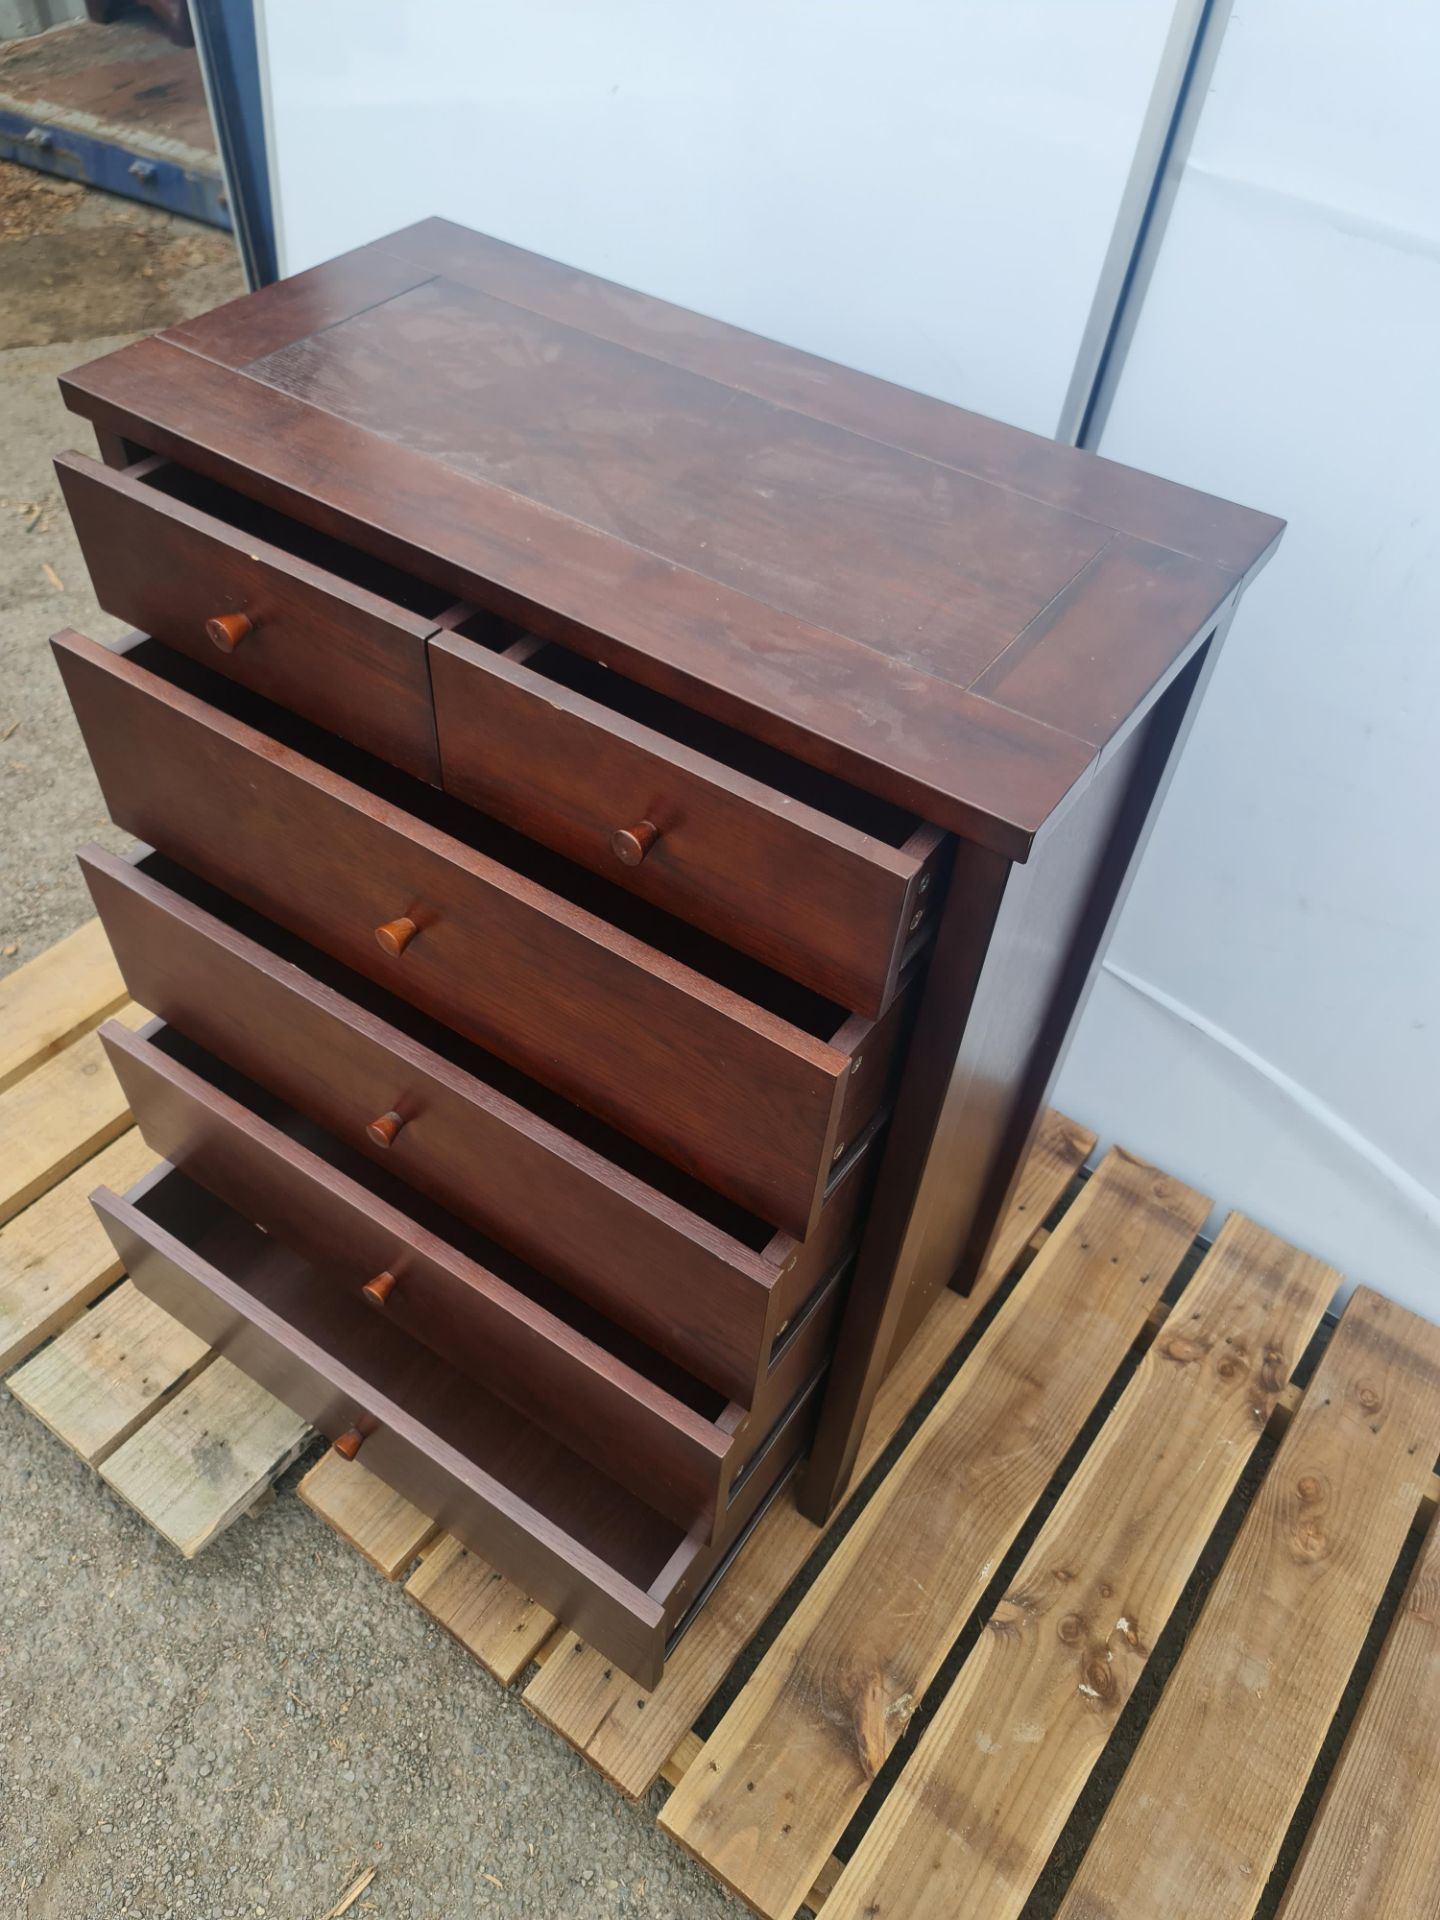 No VAT Six Drawer Cherrywood Chest Of Drawers - Image 2 of 2